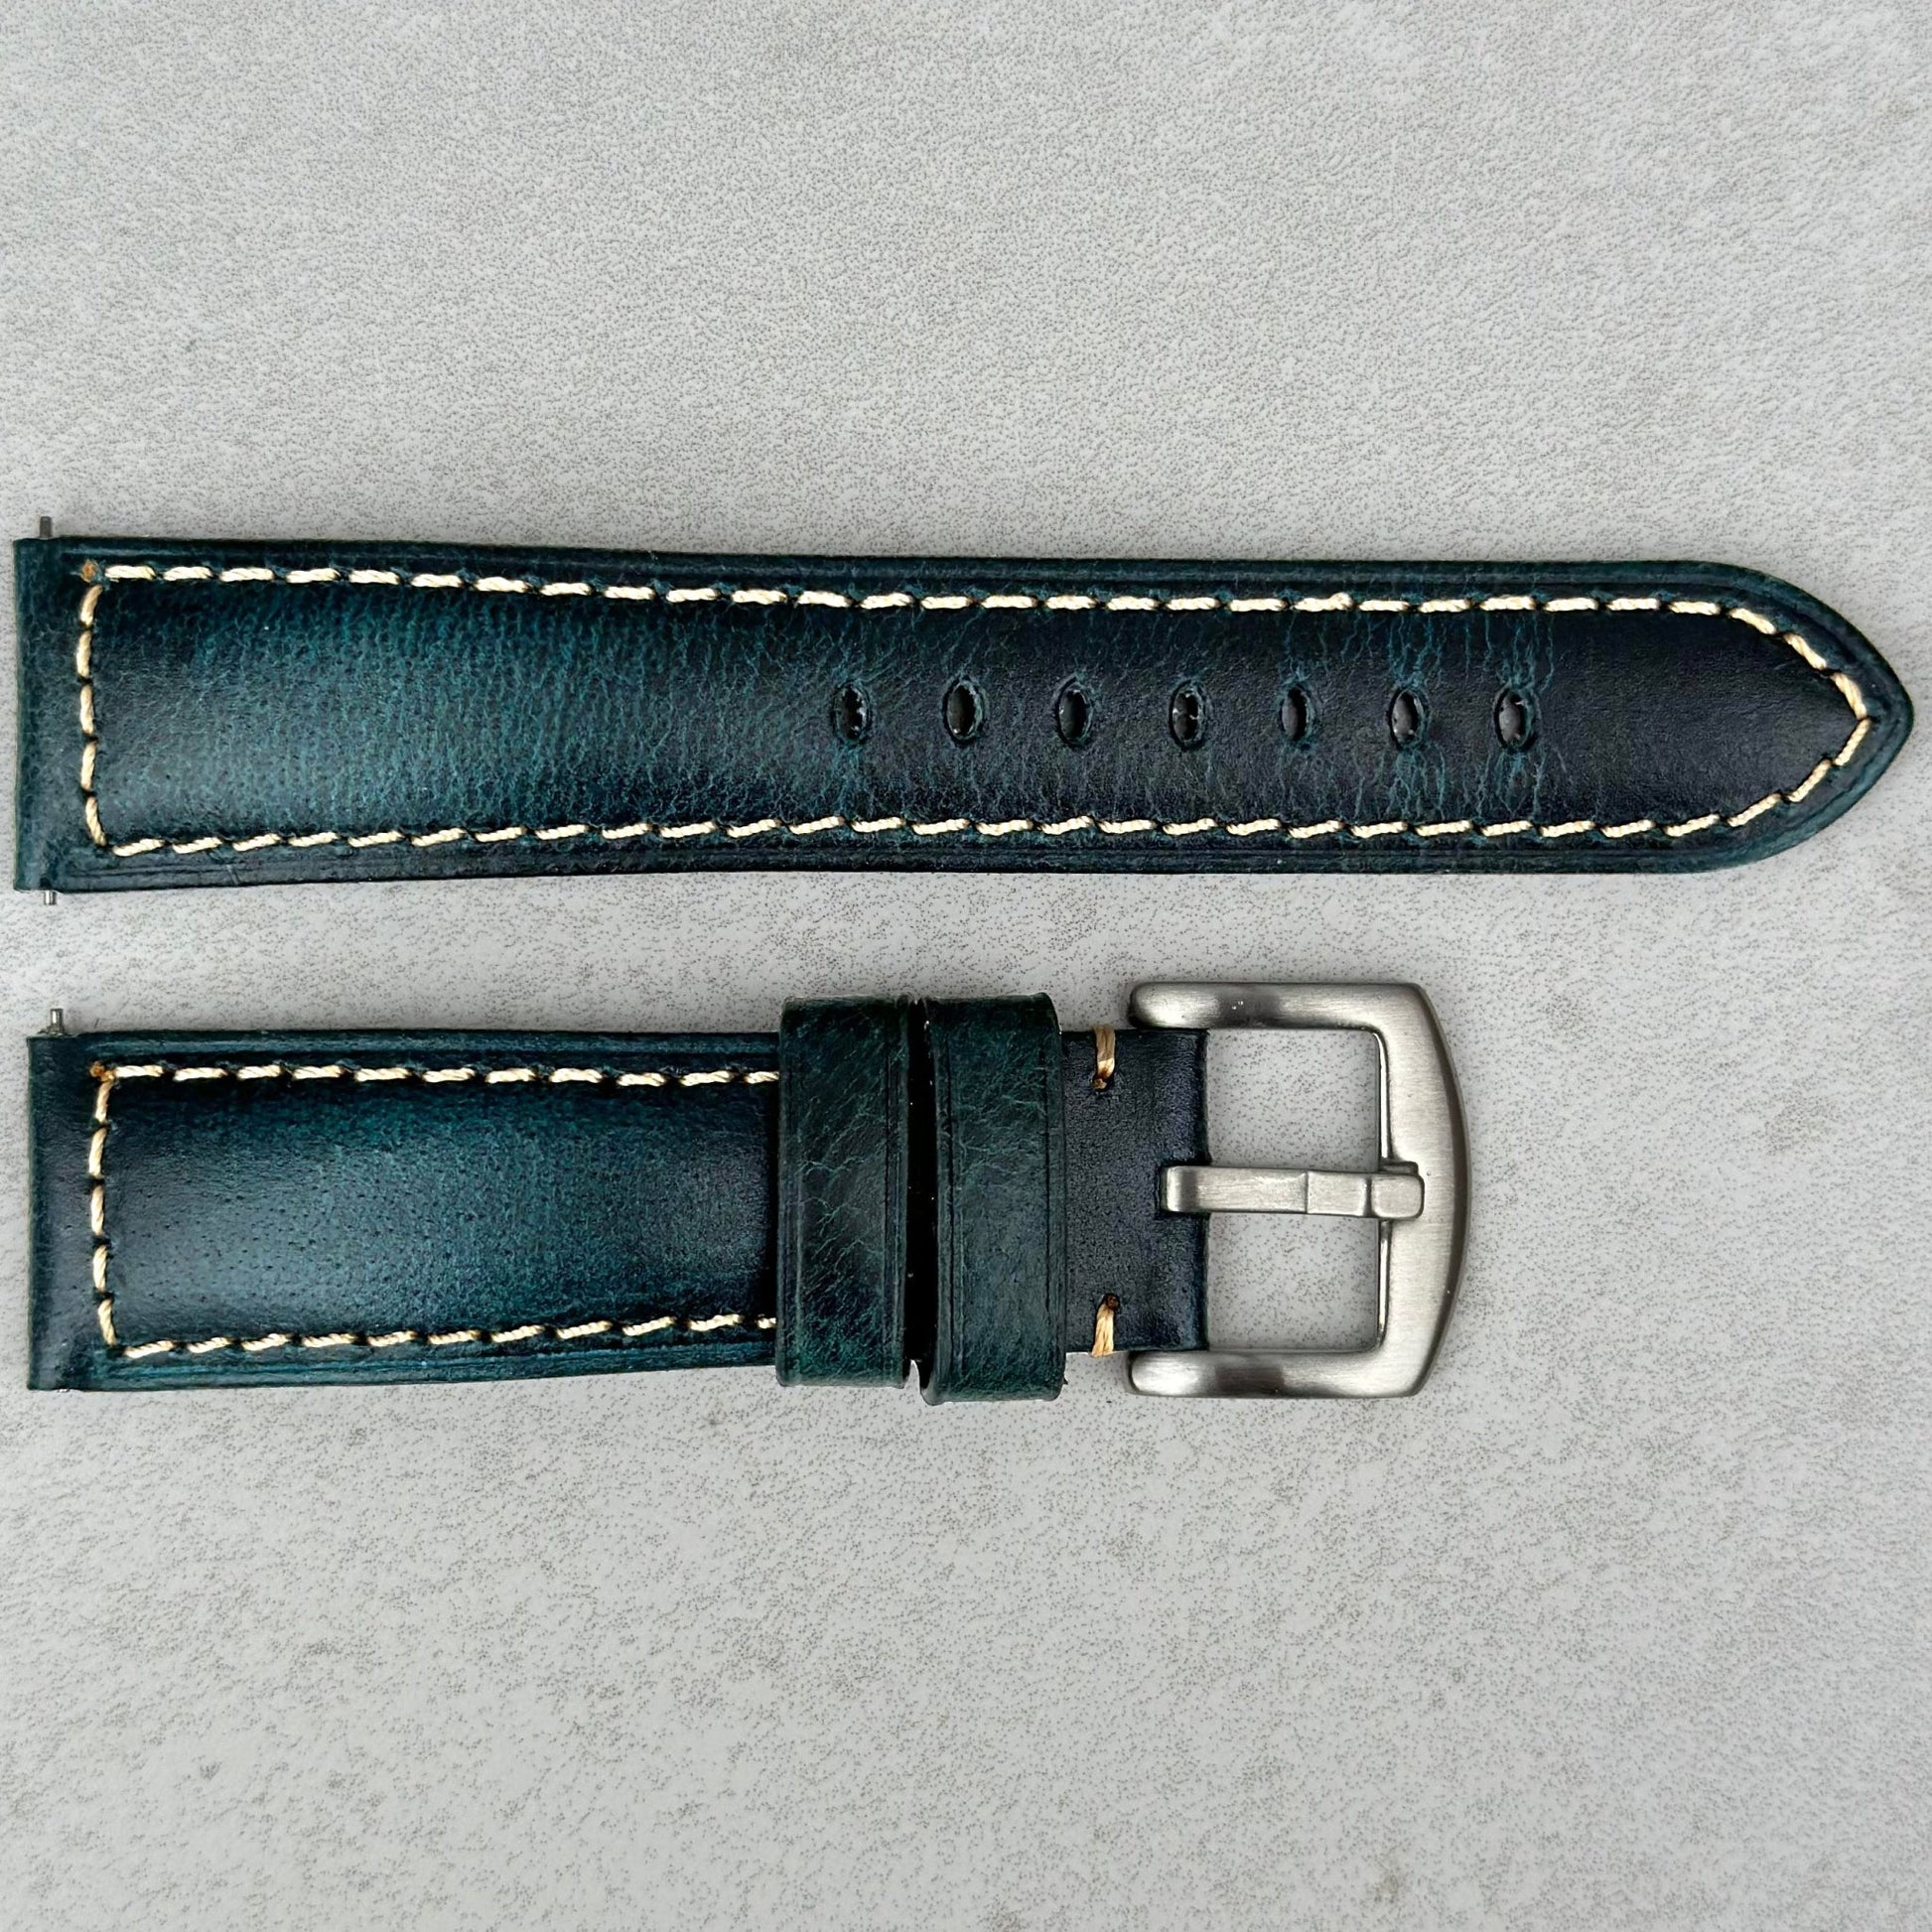 Berlin blue full grain leather watch strap. Contrast ivory stitching. Brushed 316L stainless steel buckle.